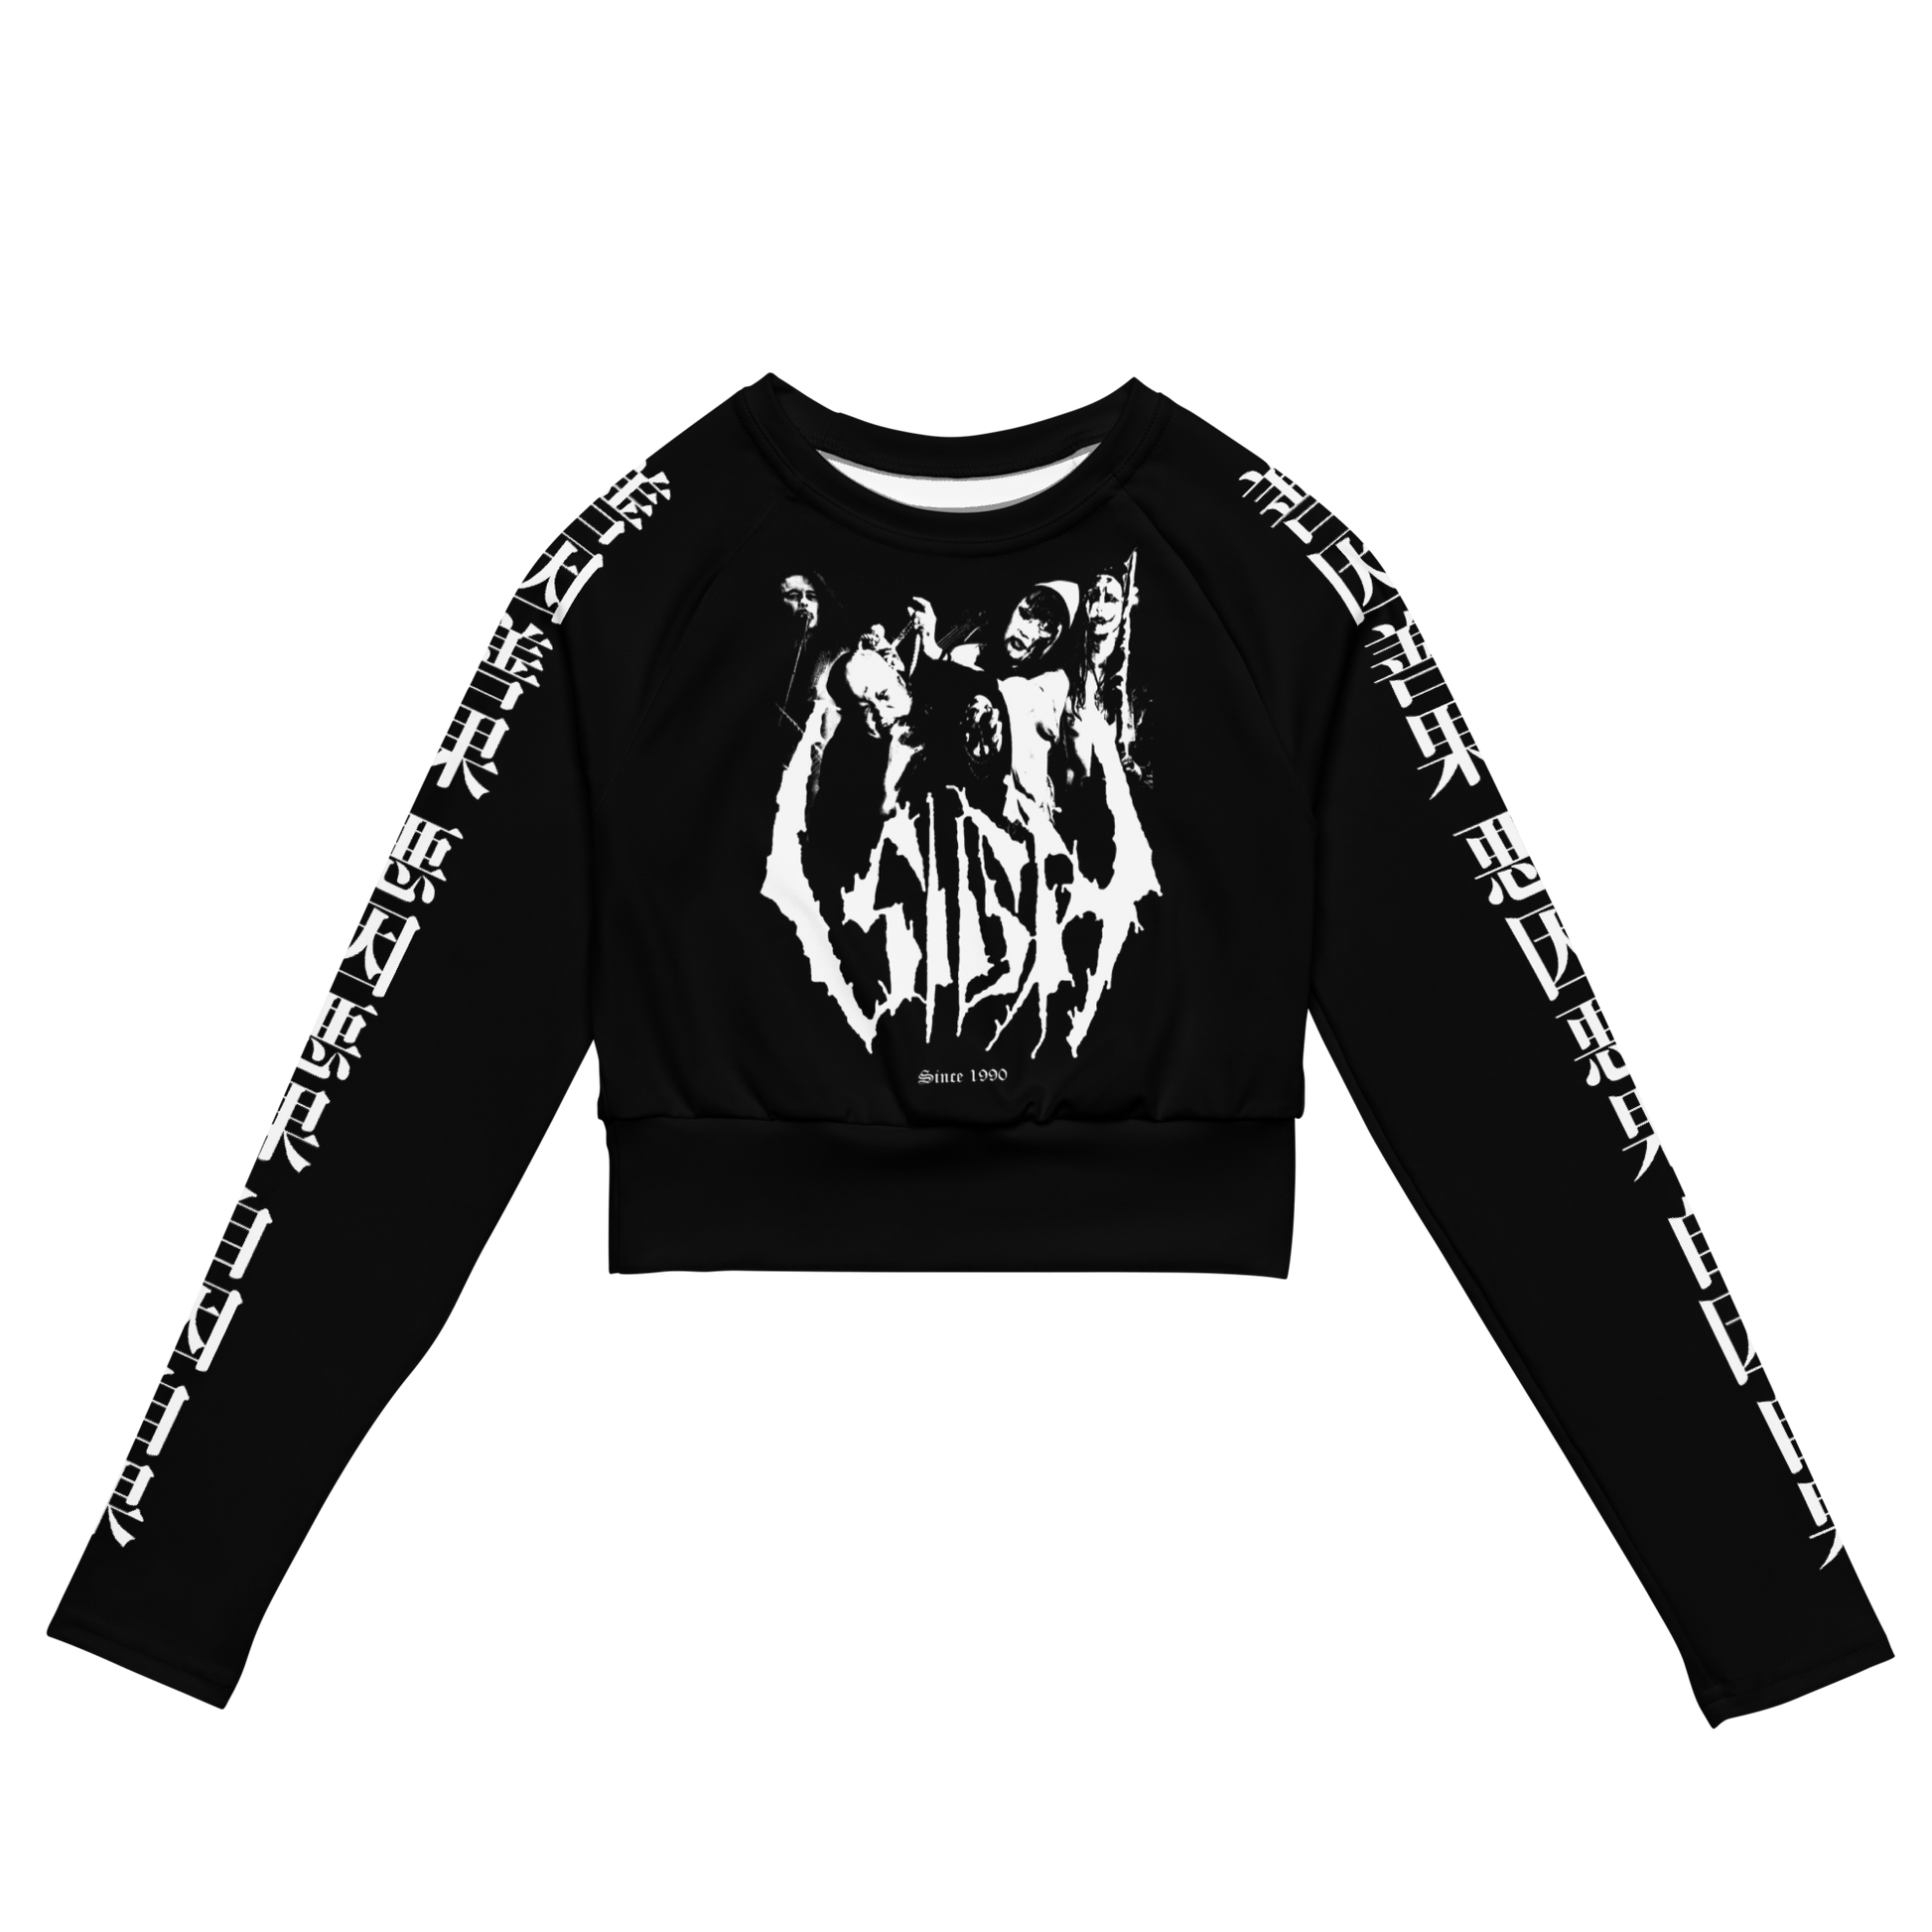 Sigh 1990 official long sleeve crop top by Metal Mistress